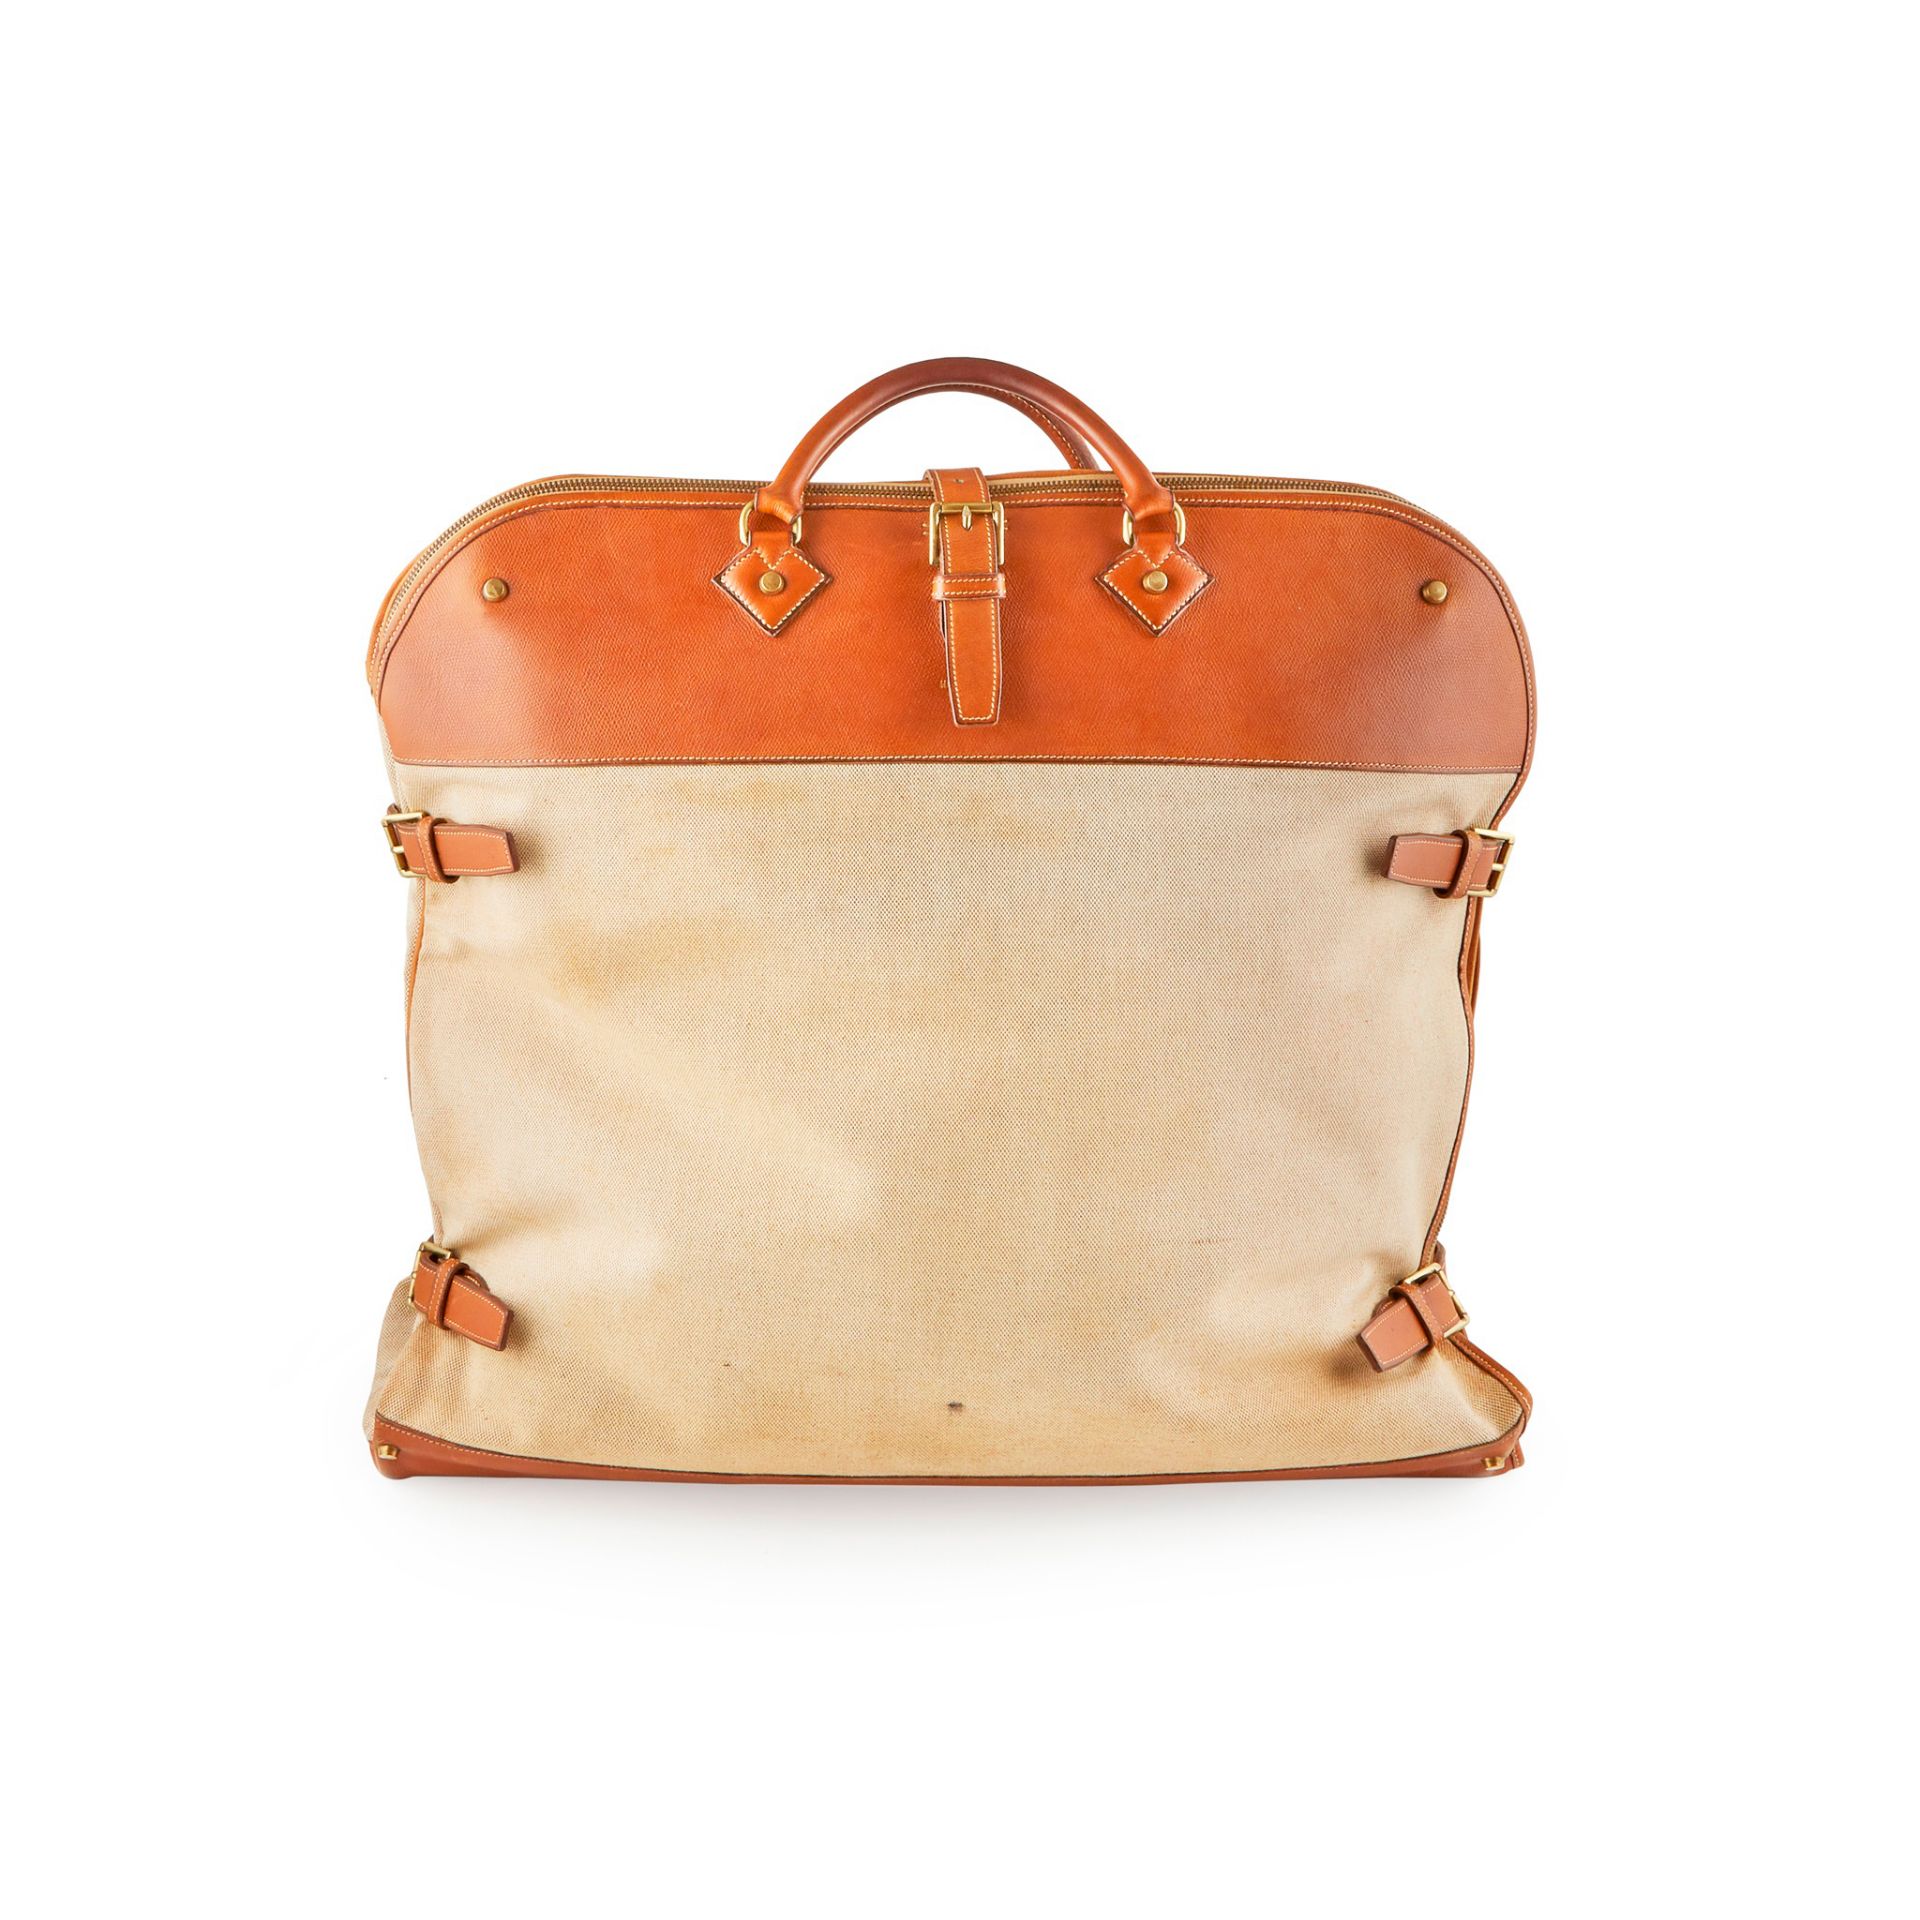 A leather and canvas 'Atlas' suit carrier, Hermès - Image 2 of 2